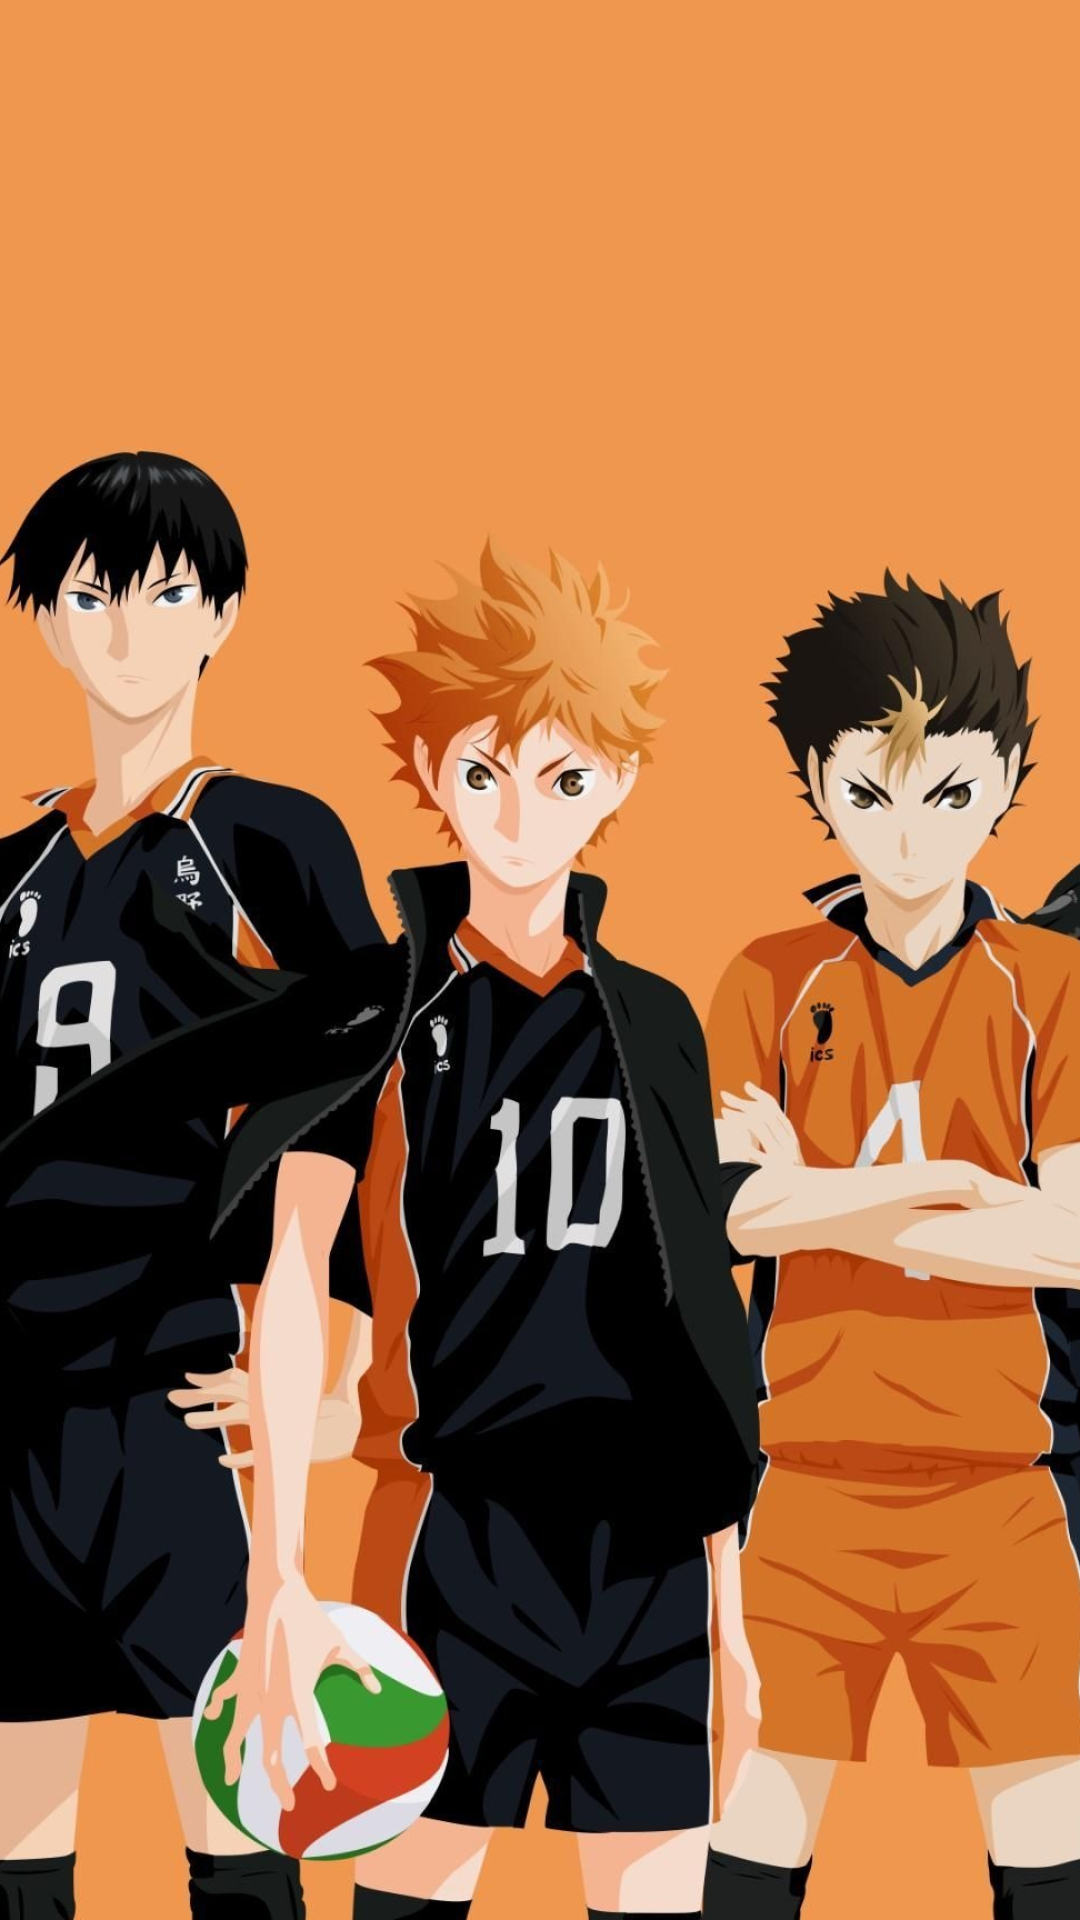 Haikyuu!!: Growing rapidly through each match, Main anime characters. 1080x1920 Full HD Background.